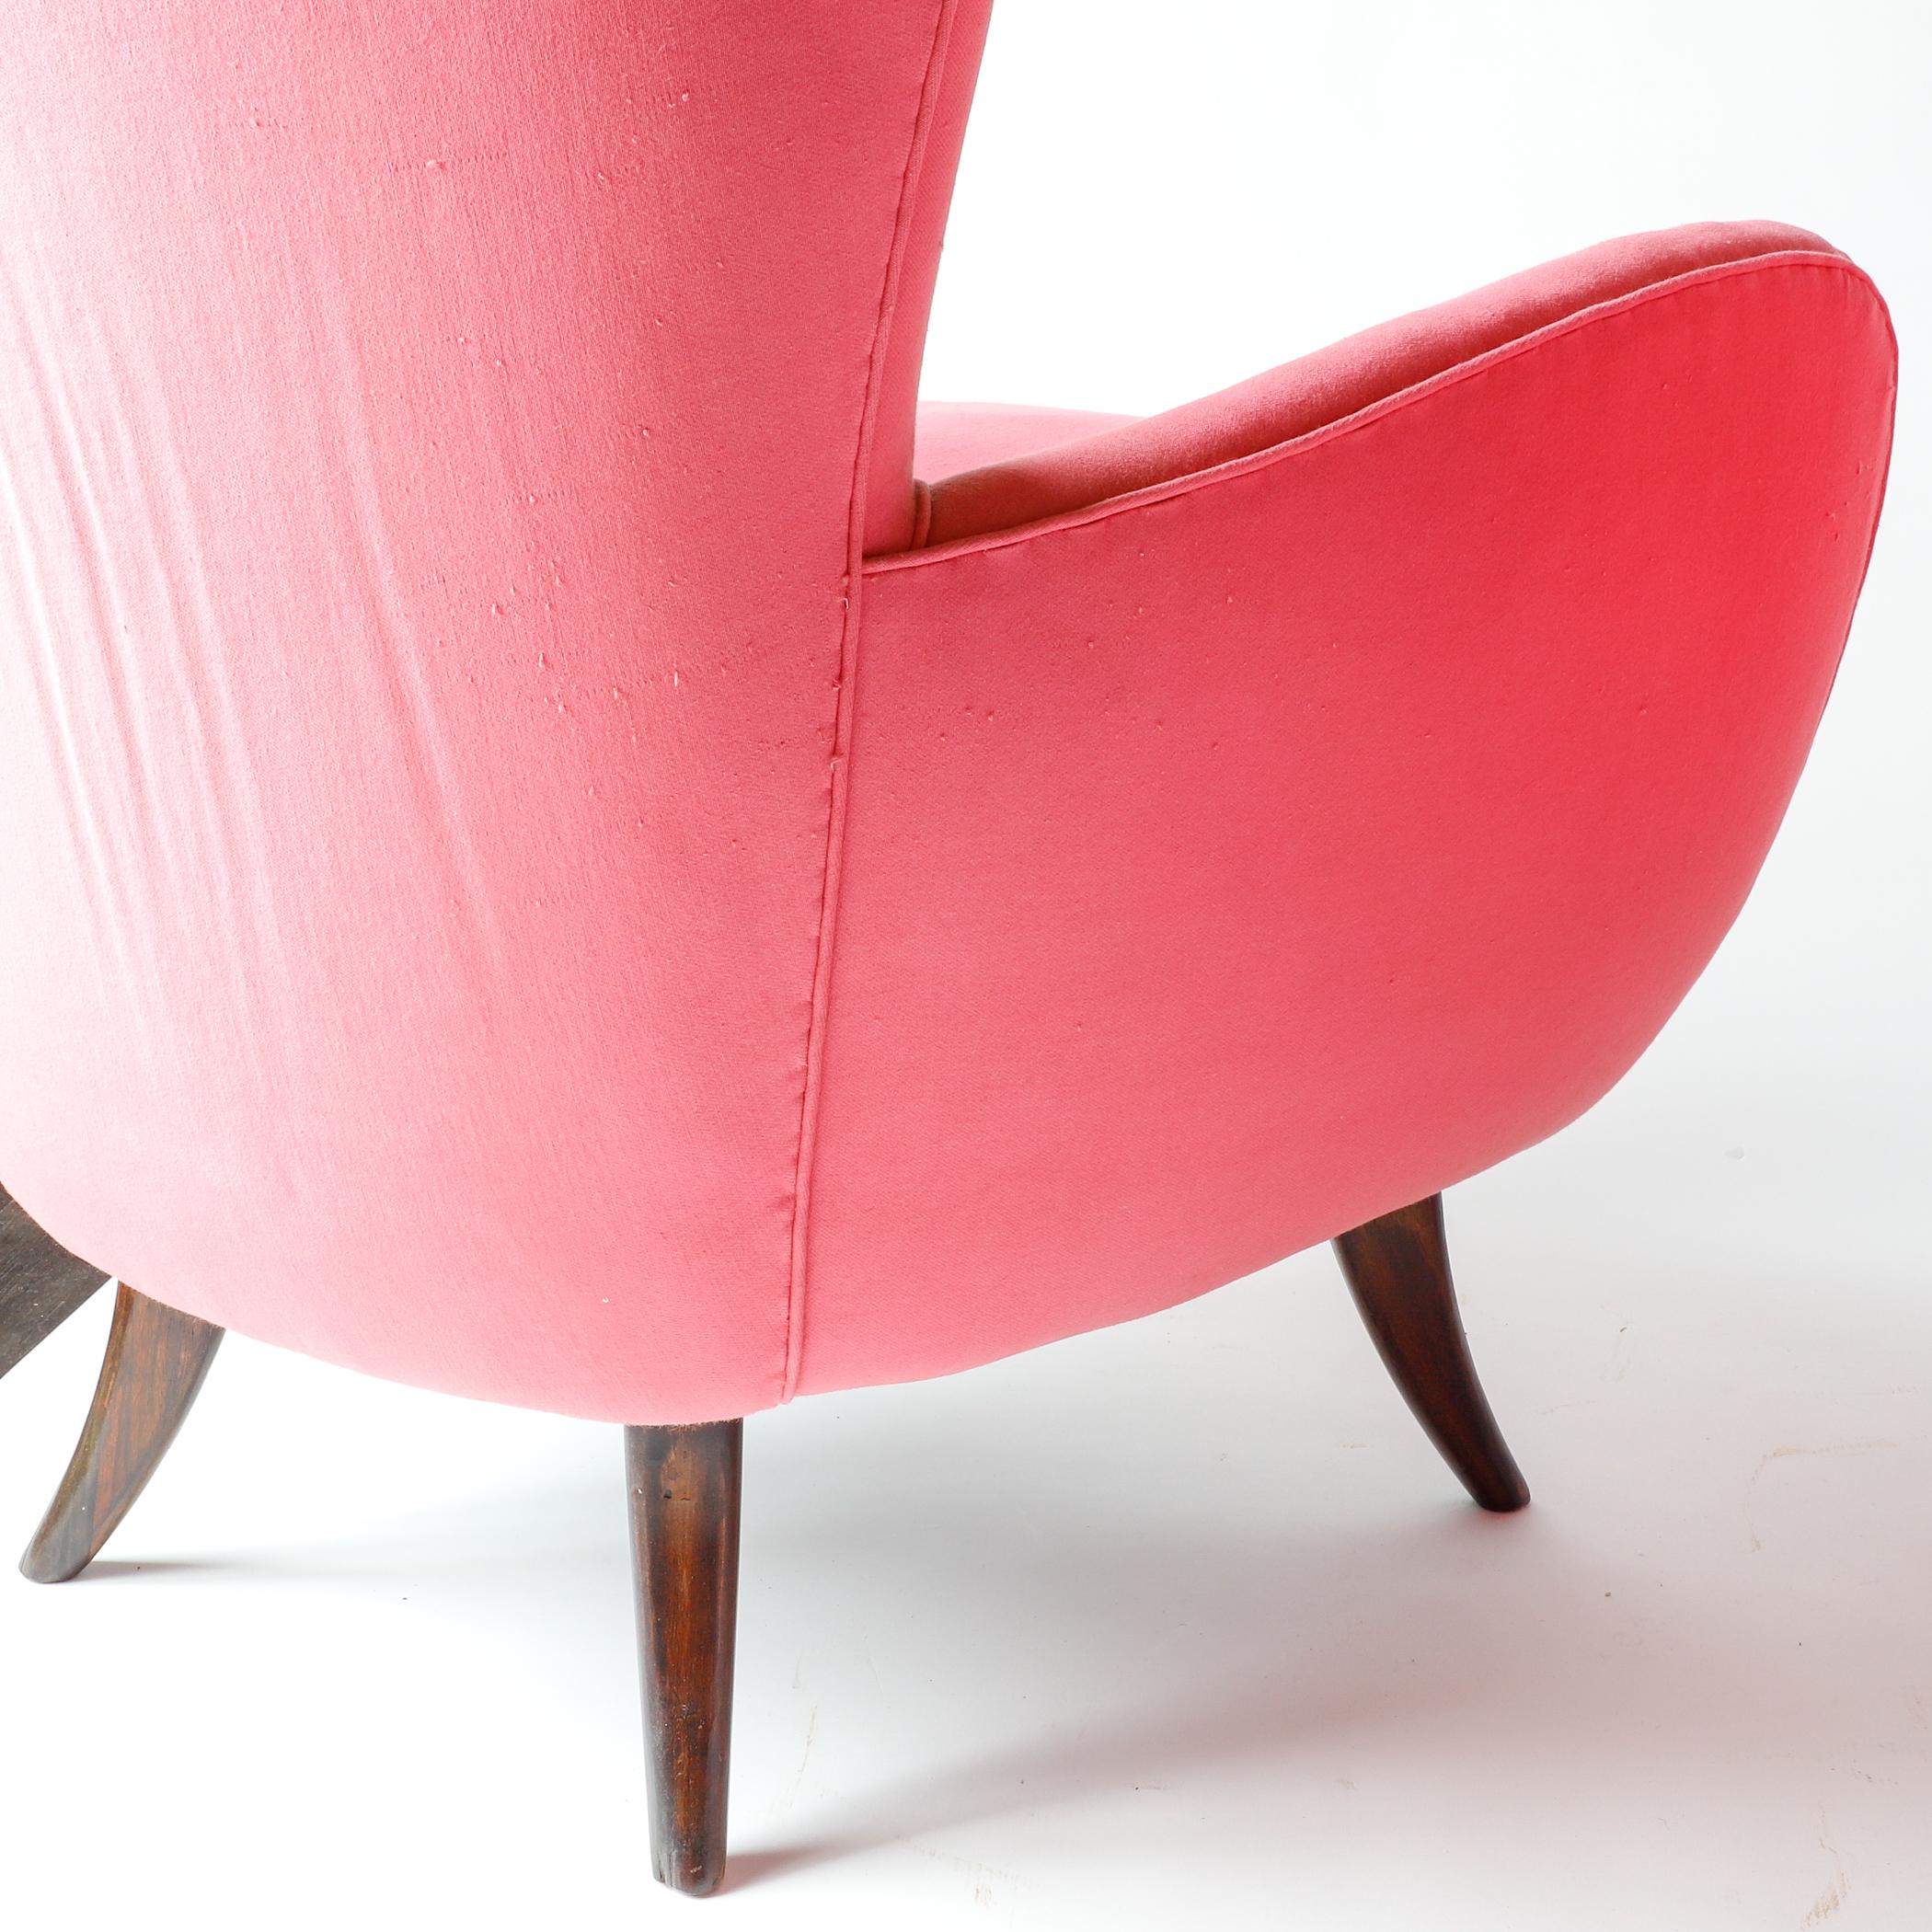 Pair of Ernst Schwadron Upholstered Lounge Chairs, 1940s, Bright Pink For Sale 2